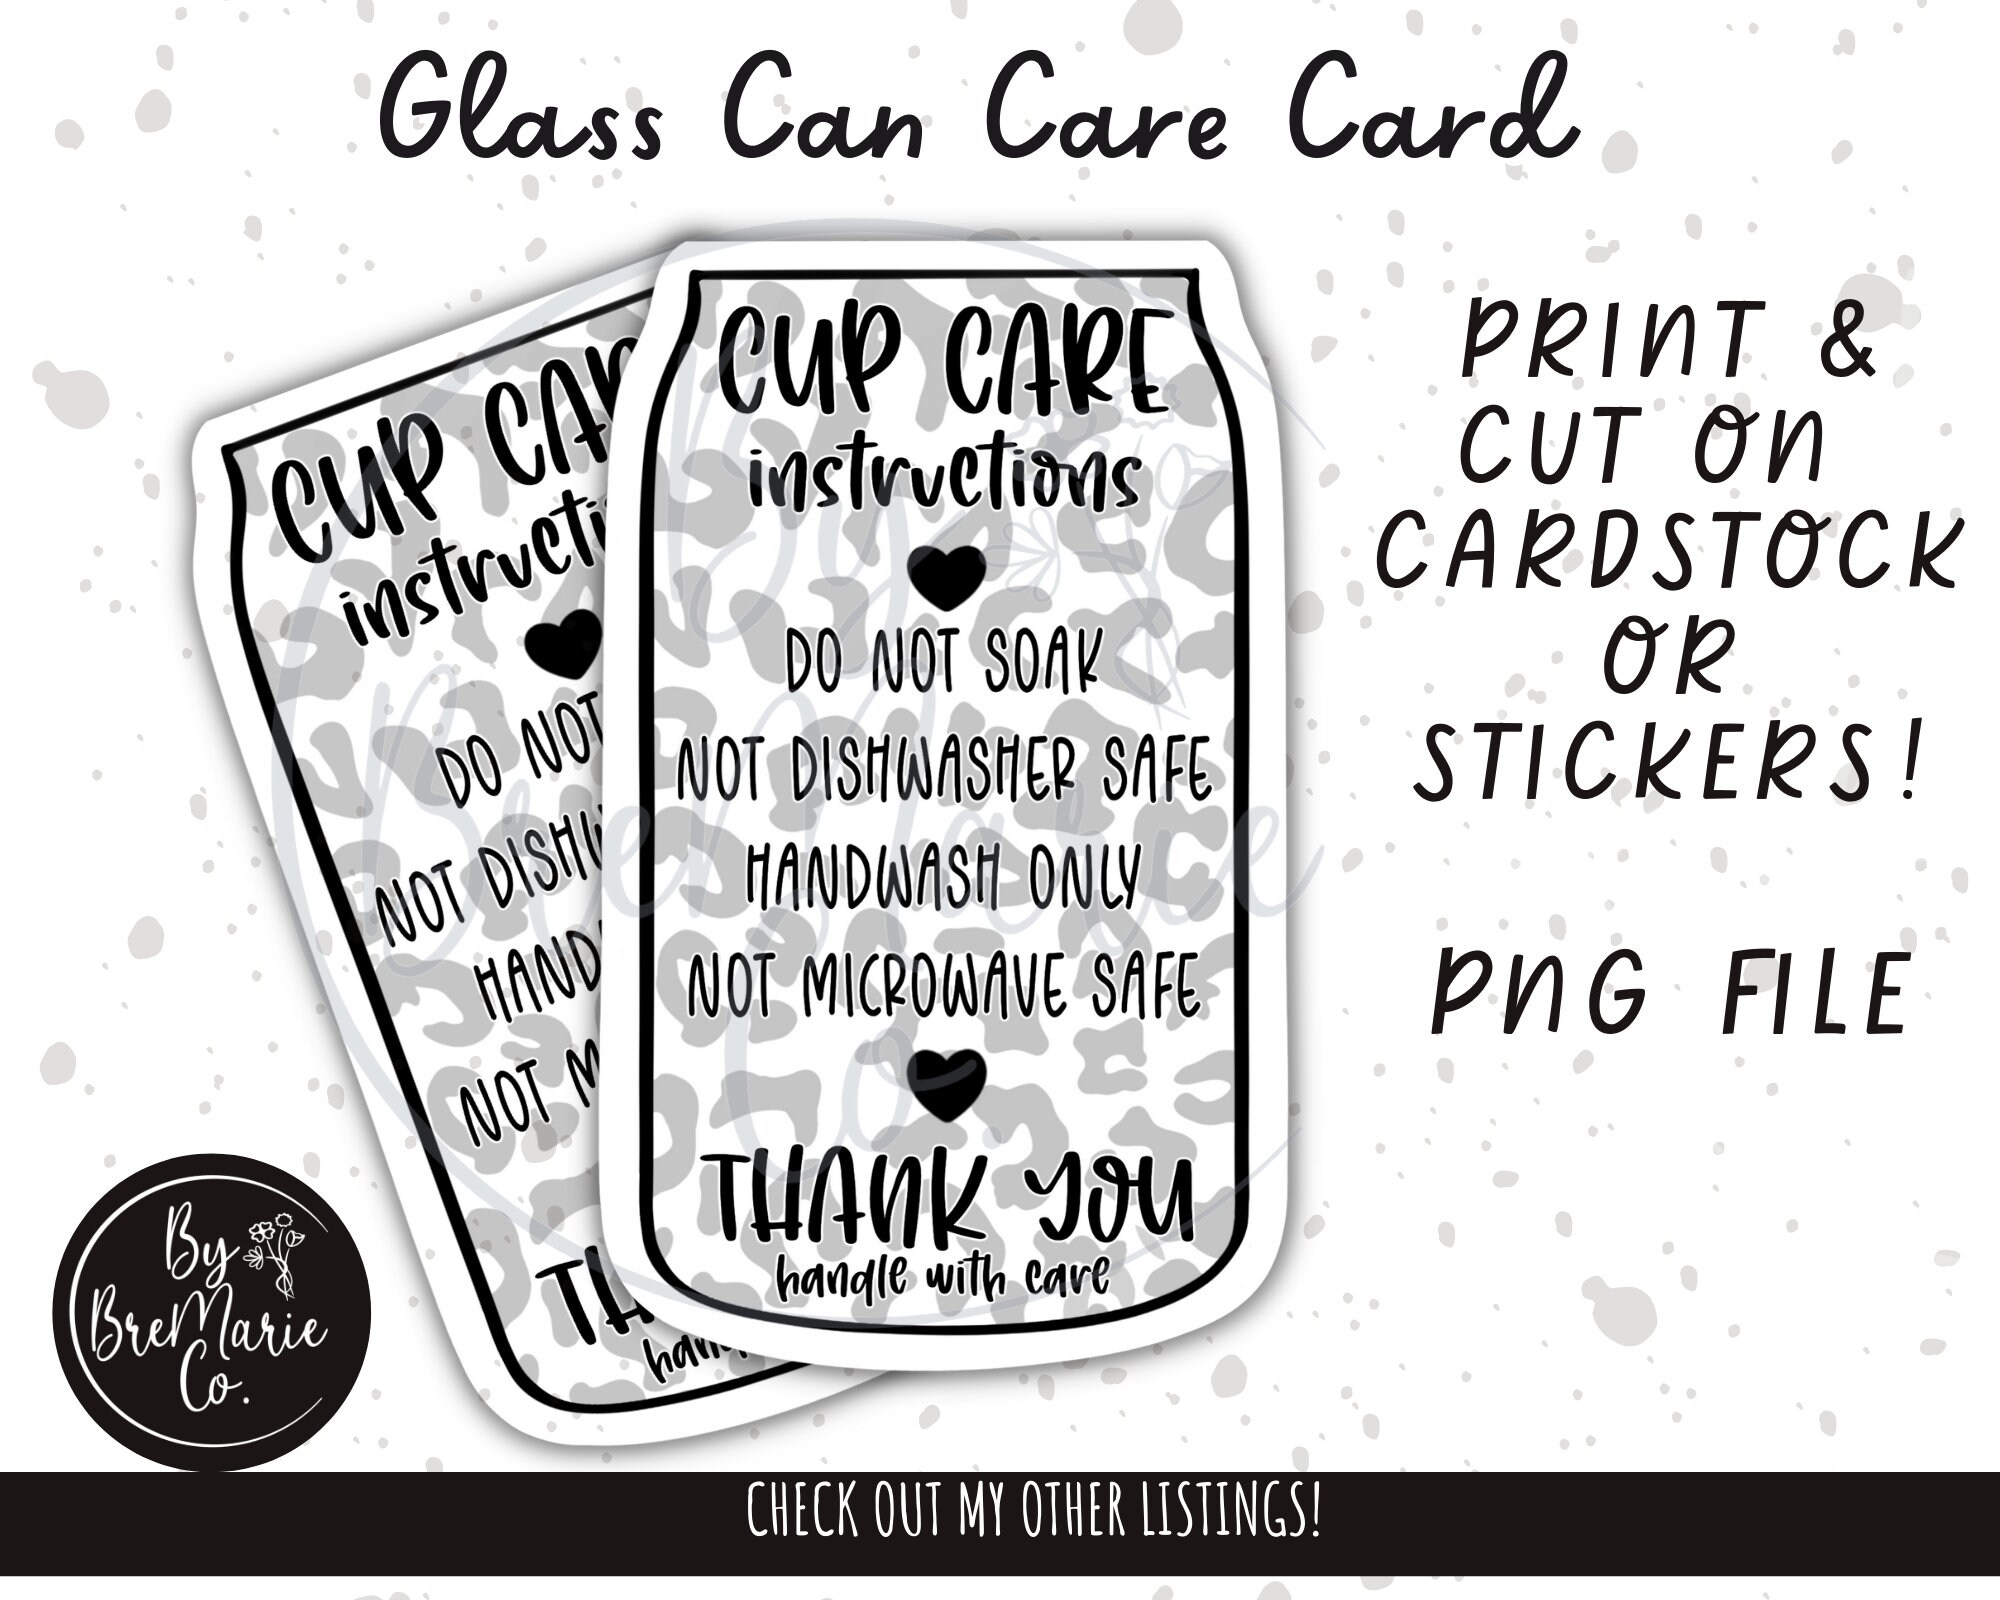 Libbey Glass Cup Care Card Glass Cup Care Instructions Stickers